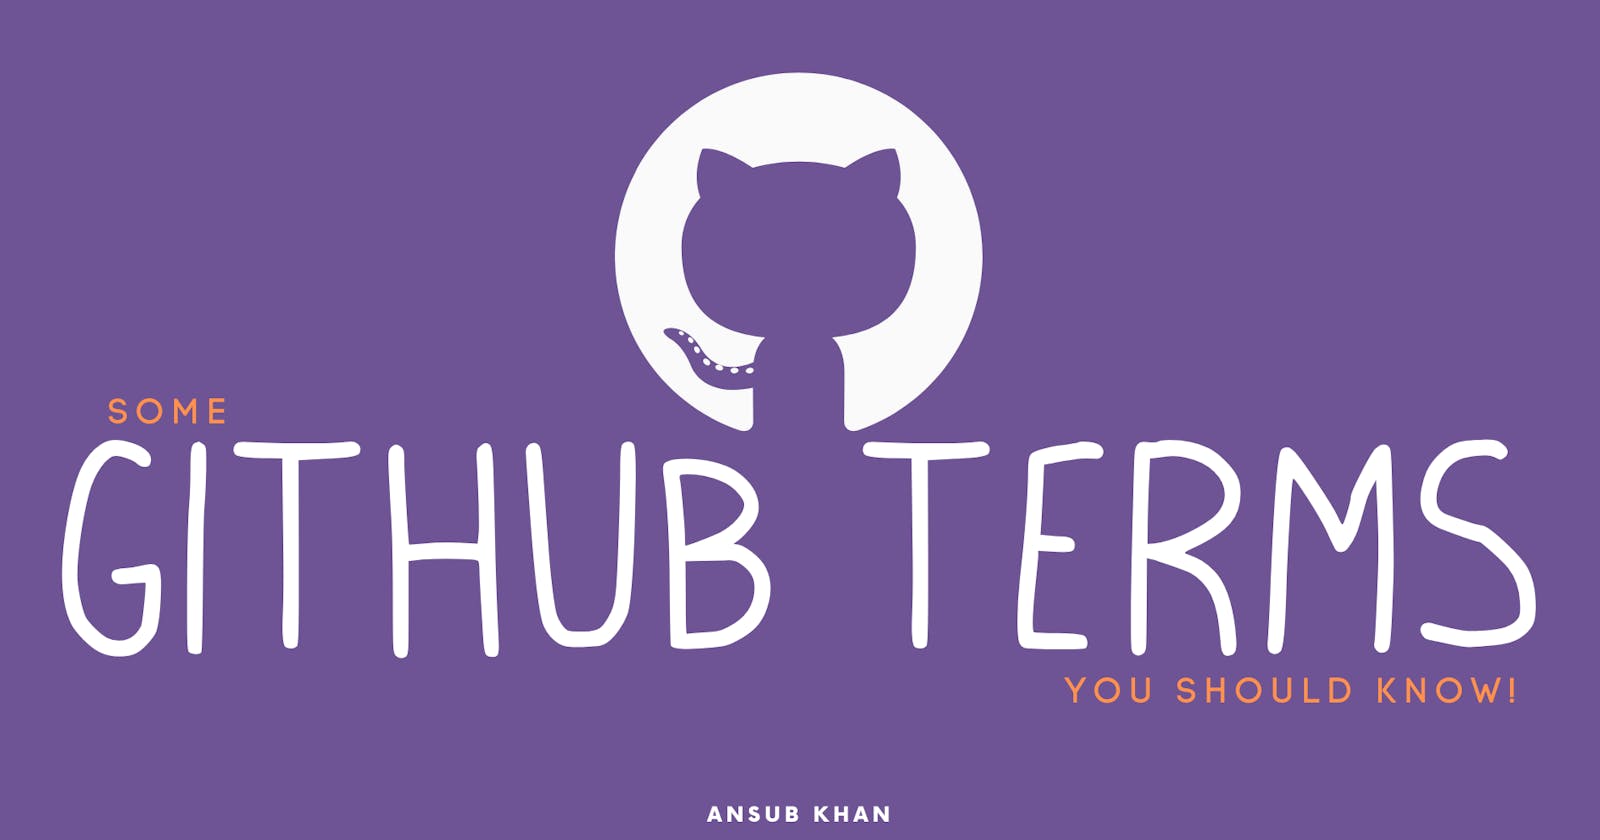 Some GitHub Terms You Should Know!